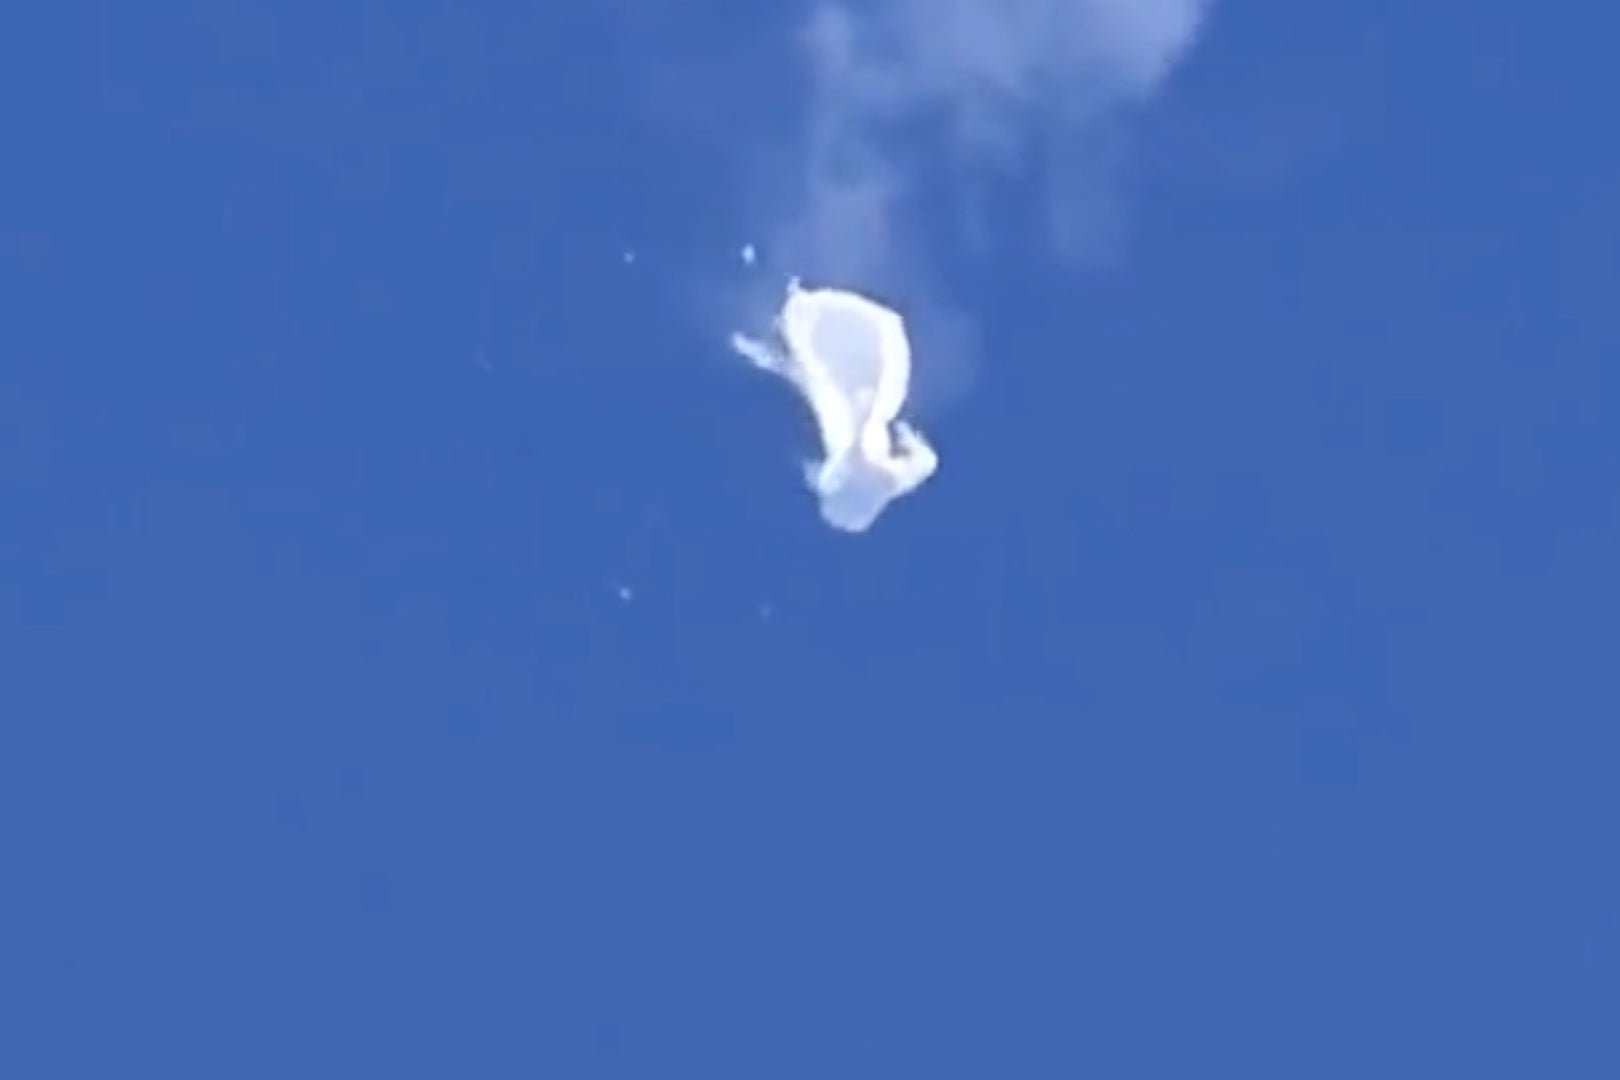 A balloon, deflated, hangs in the blue sky, losing altitude.